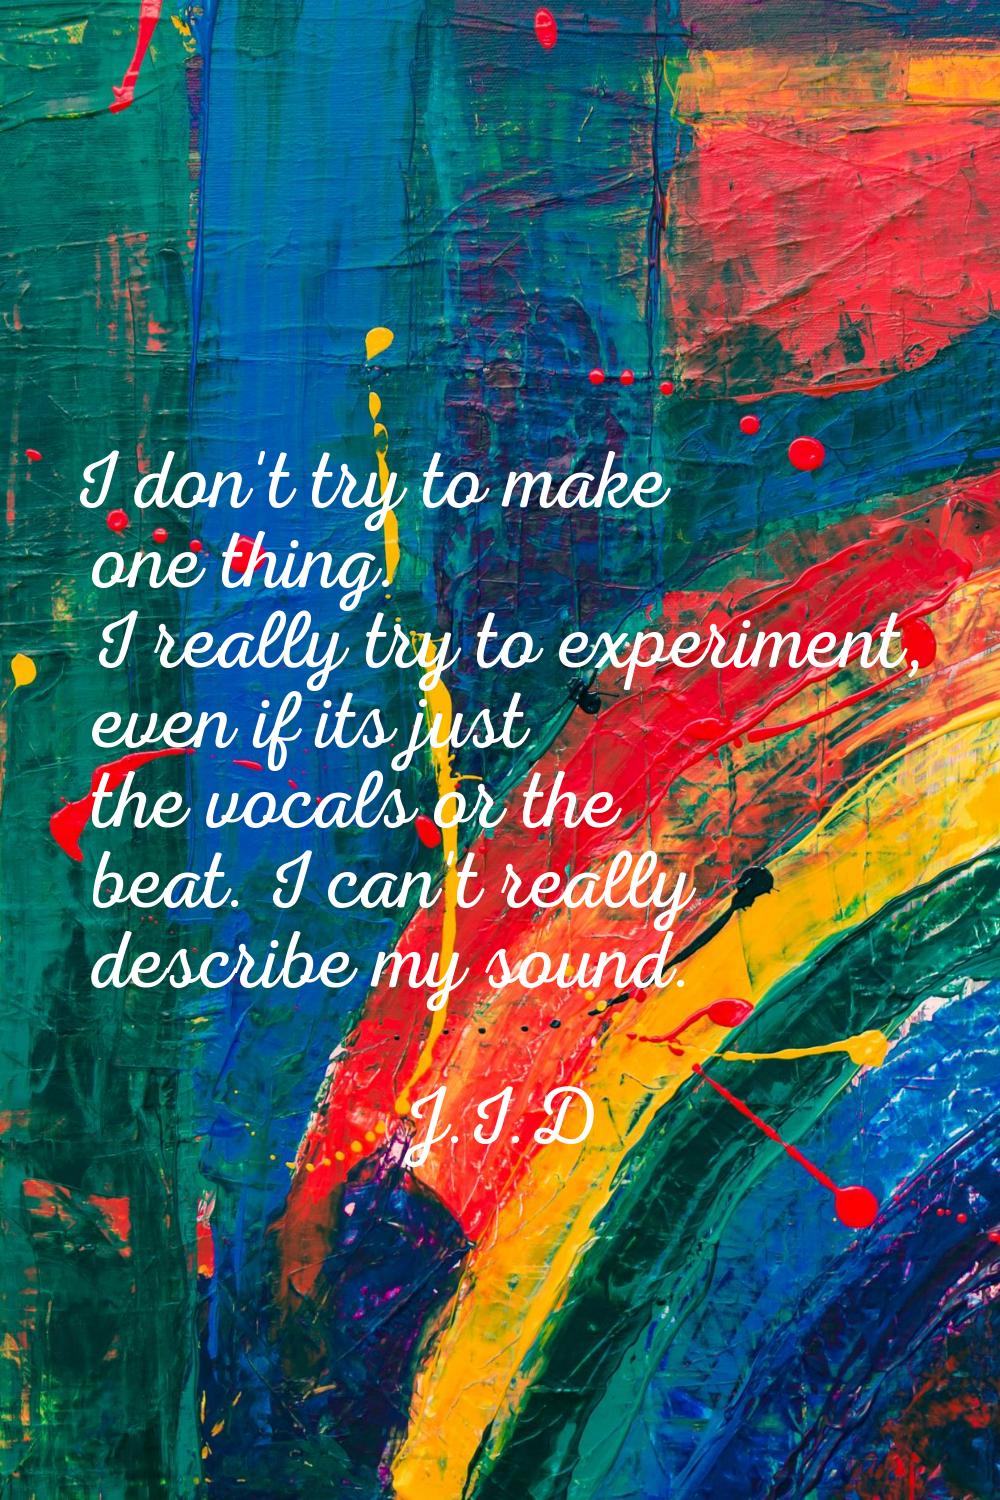 I don't try to make one thing. I really try to experiment, even if its just the vocals or the beat.